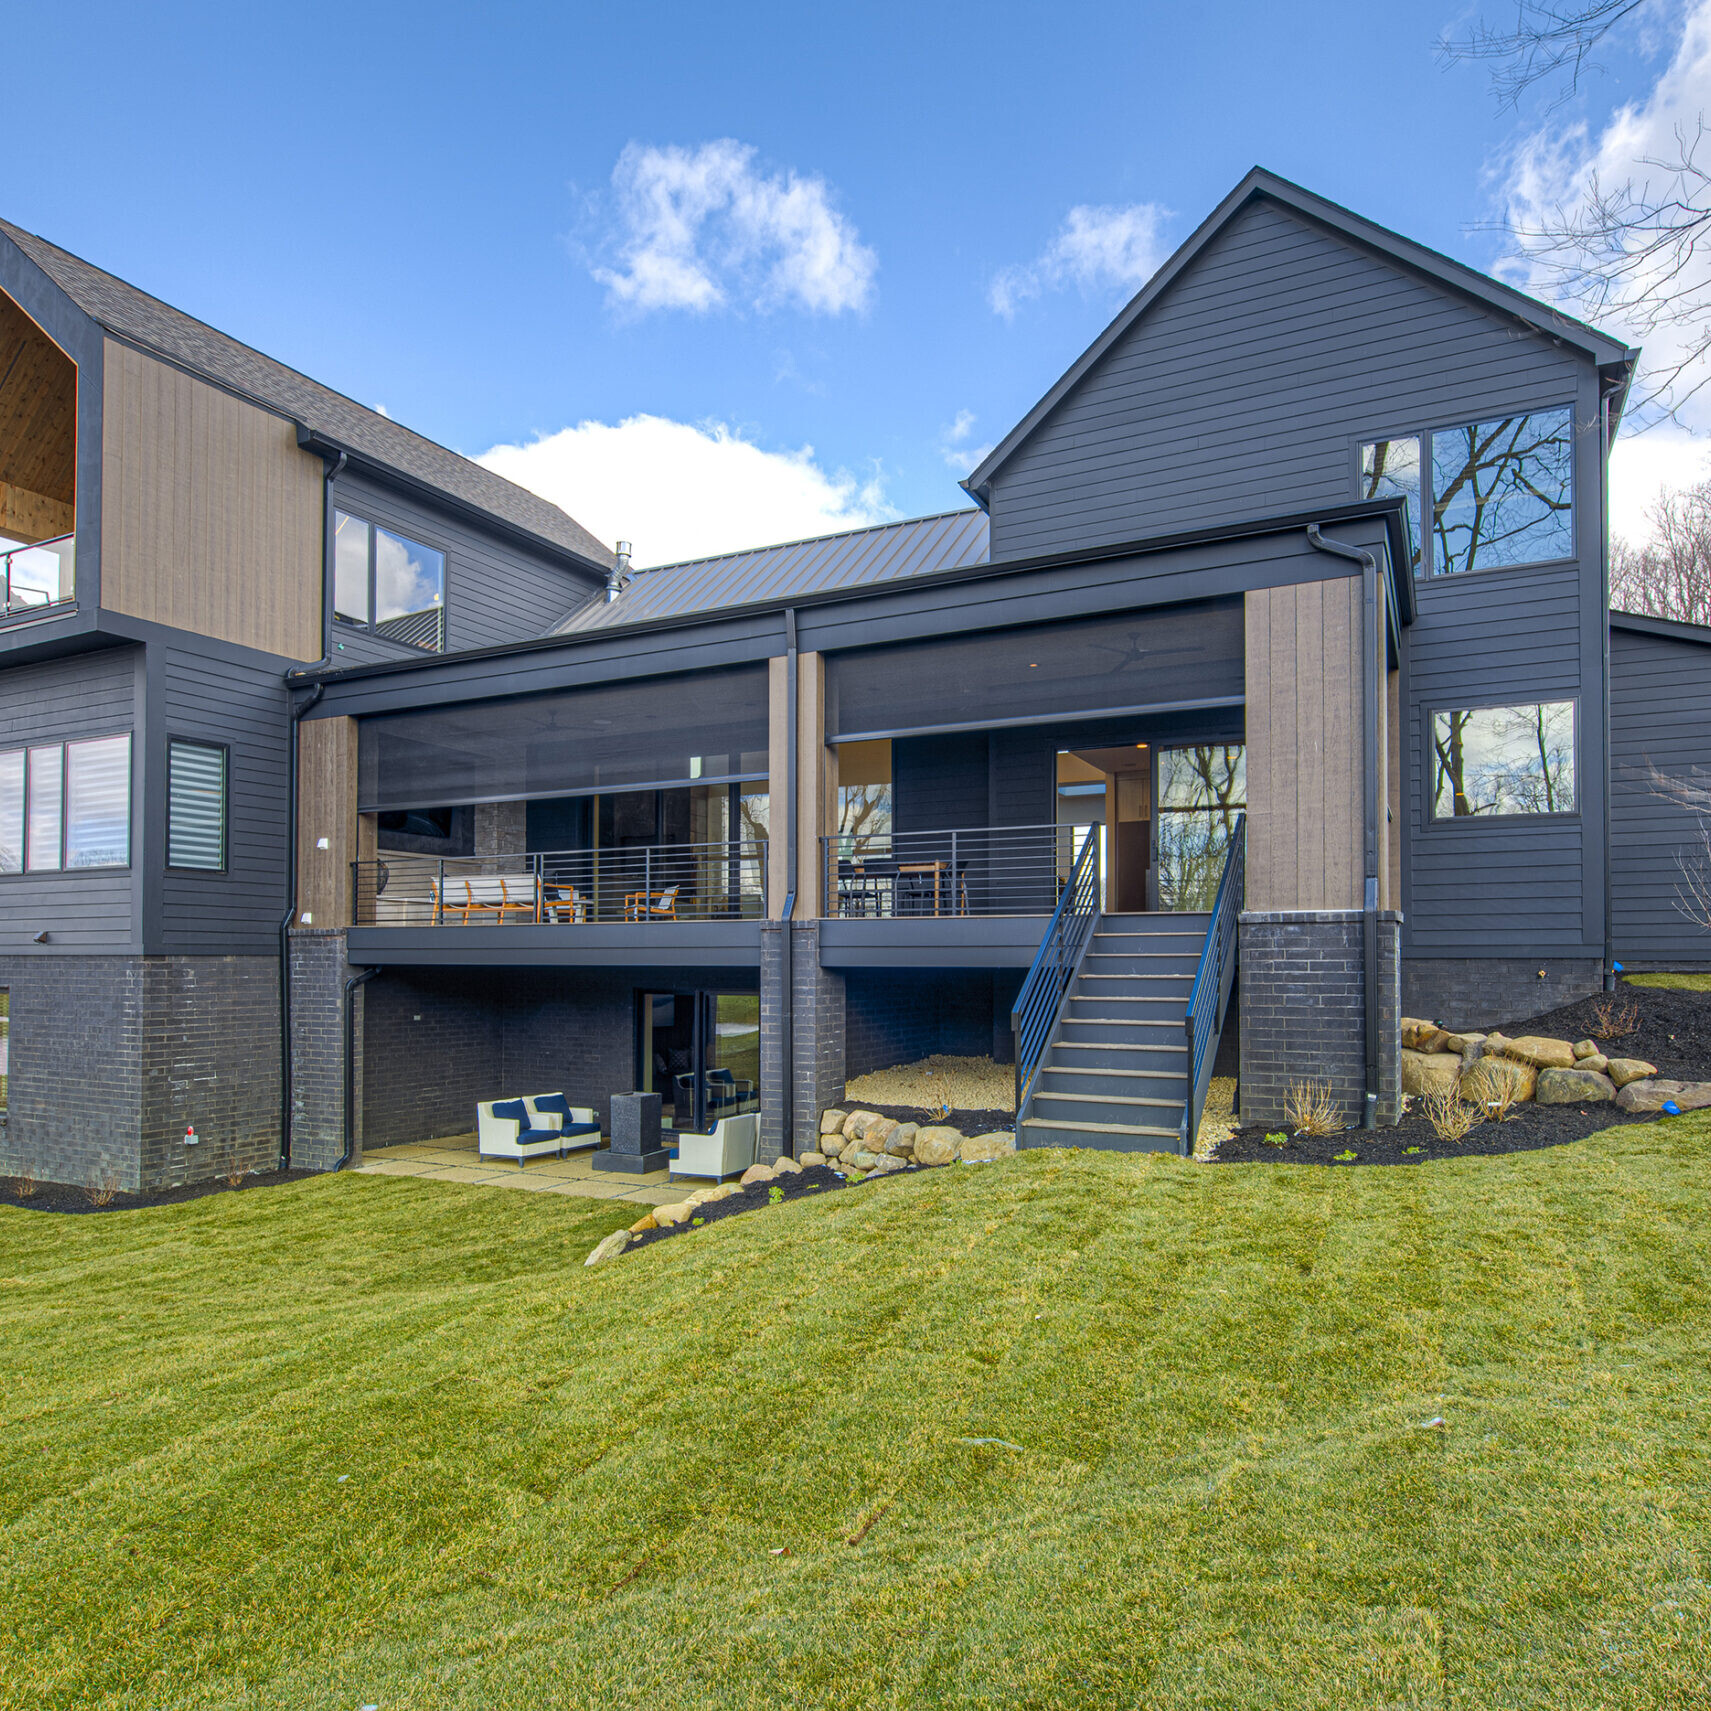 A home with a black exterior and a grassy yard.